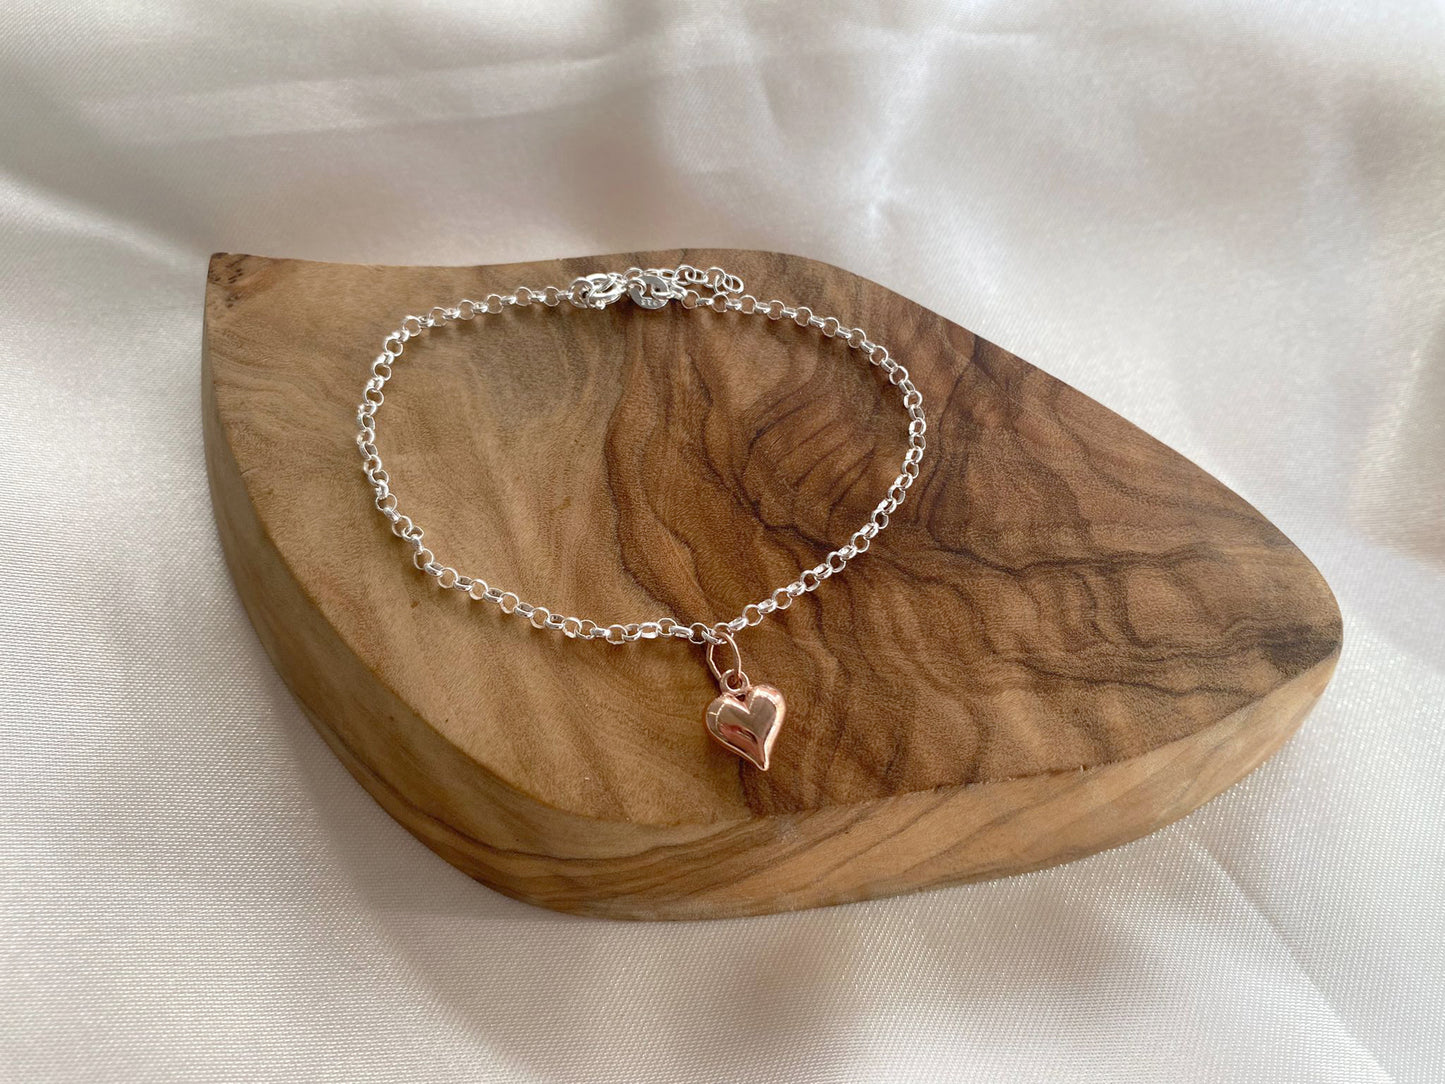 Mum Rose Gold Puffy Heart Bracelet in Sterling Silver 925, Personalised Gift